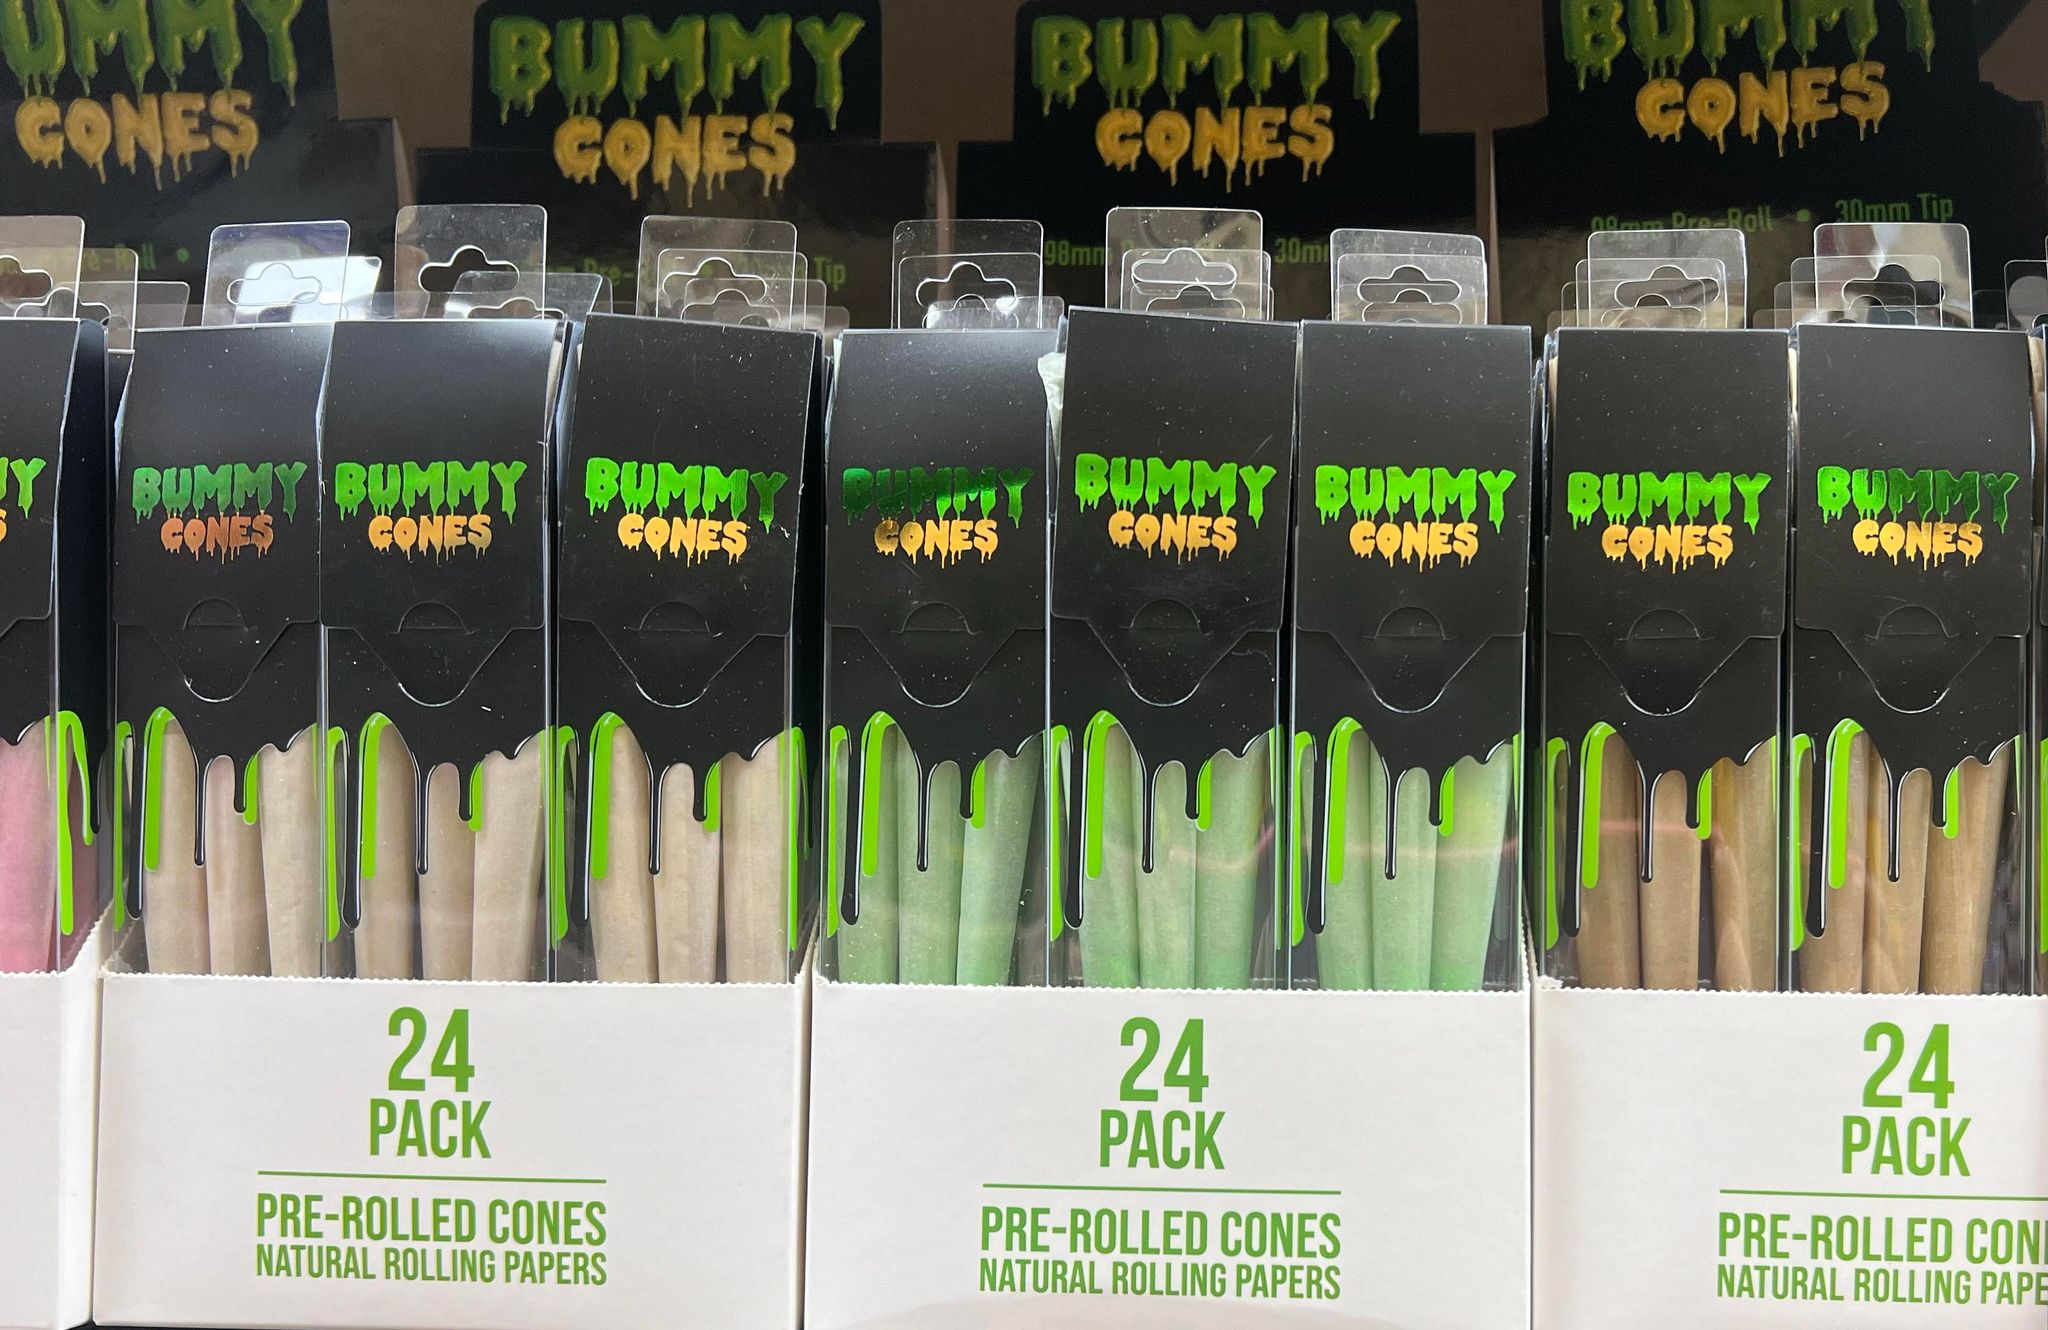 BUMMY CONES PRE-ROLLED CONES | 24 PACK